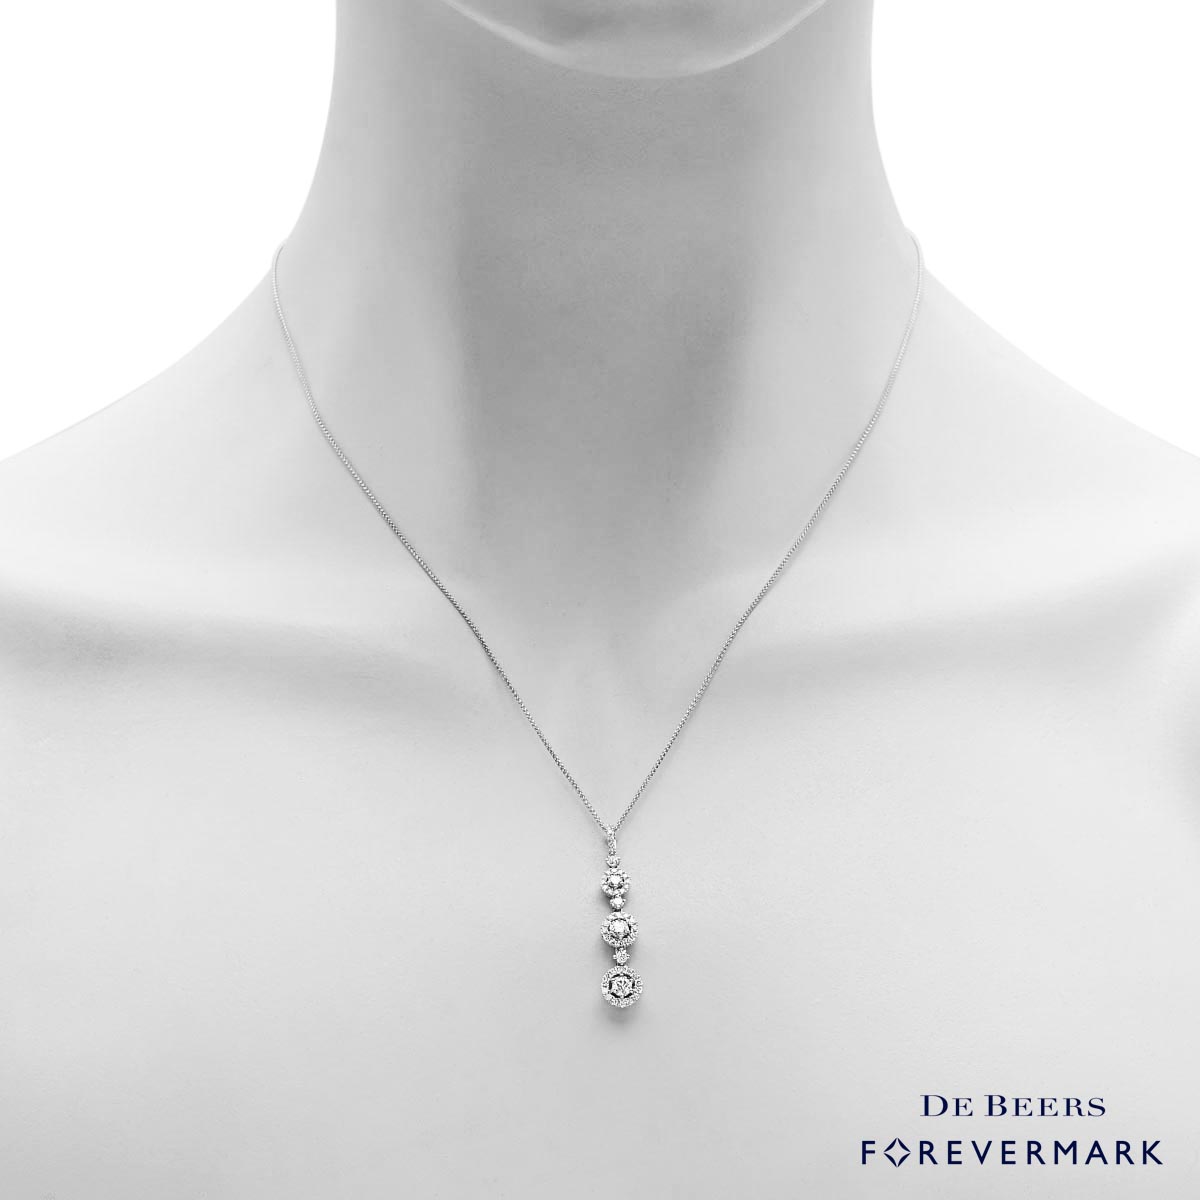 De Beers Forevermark Center of My Universe Three Stone Diamond Necklace in 18kt White Gold (5/8ct tw)